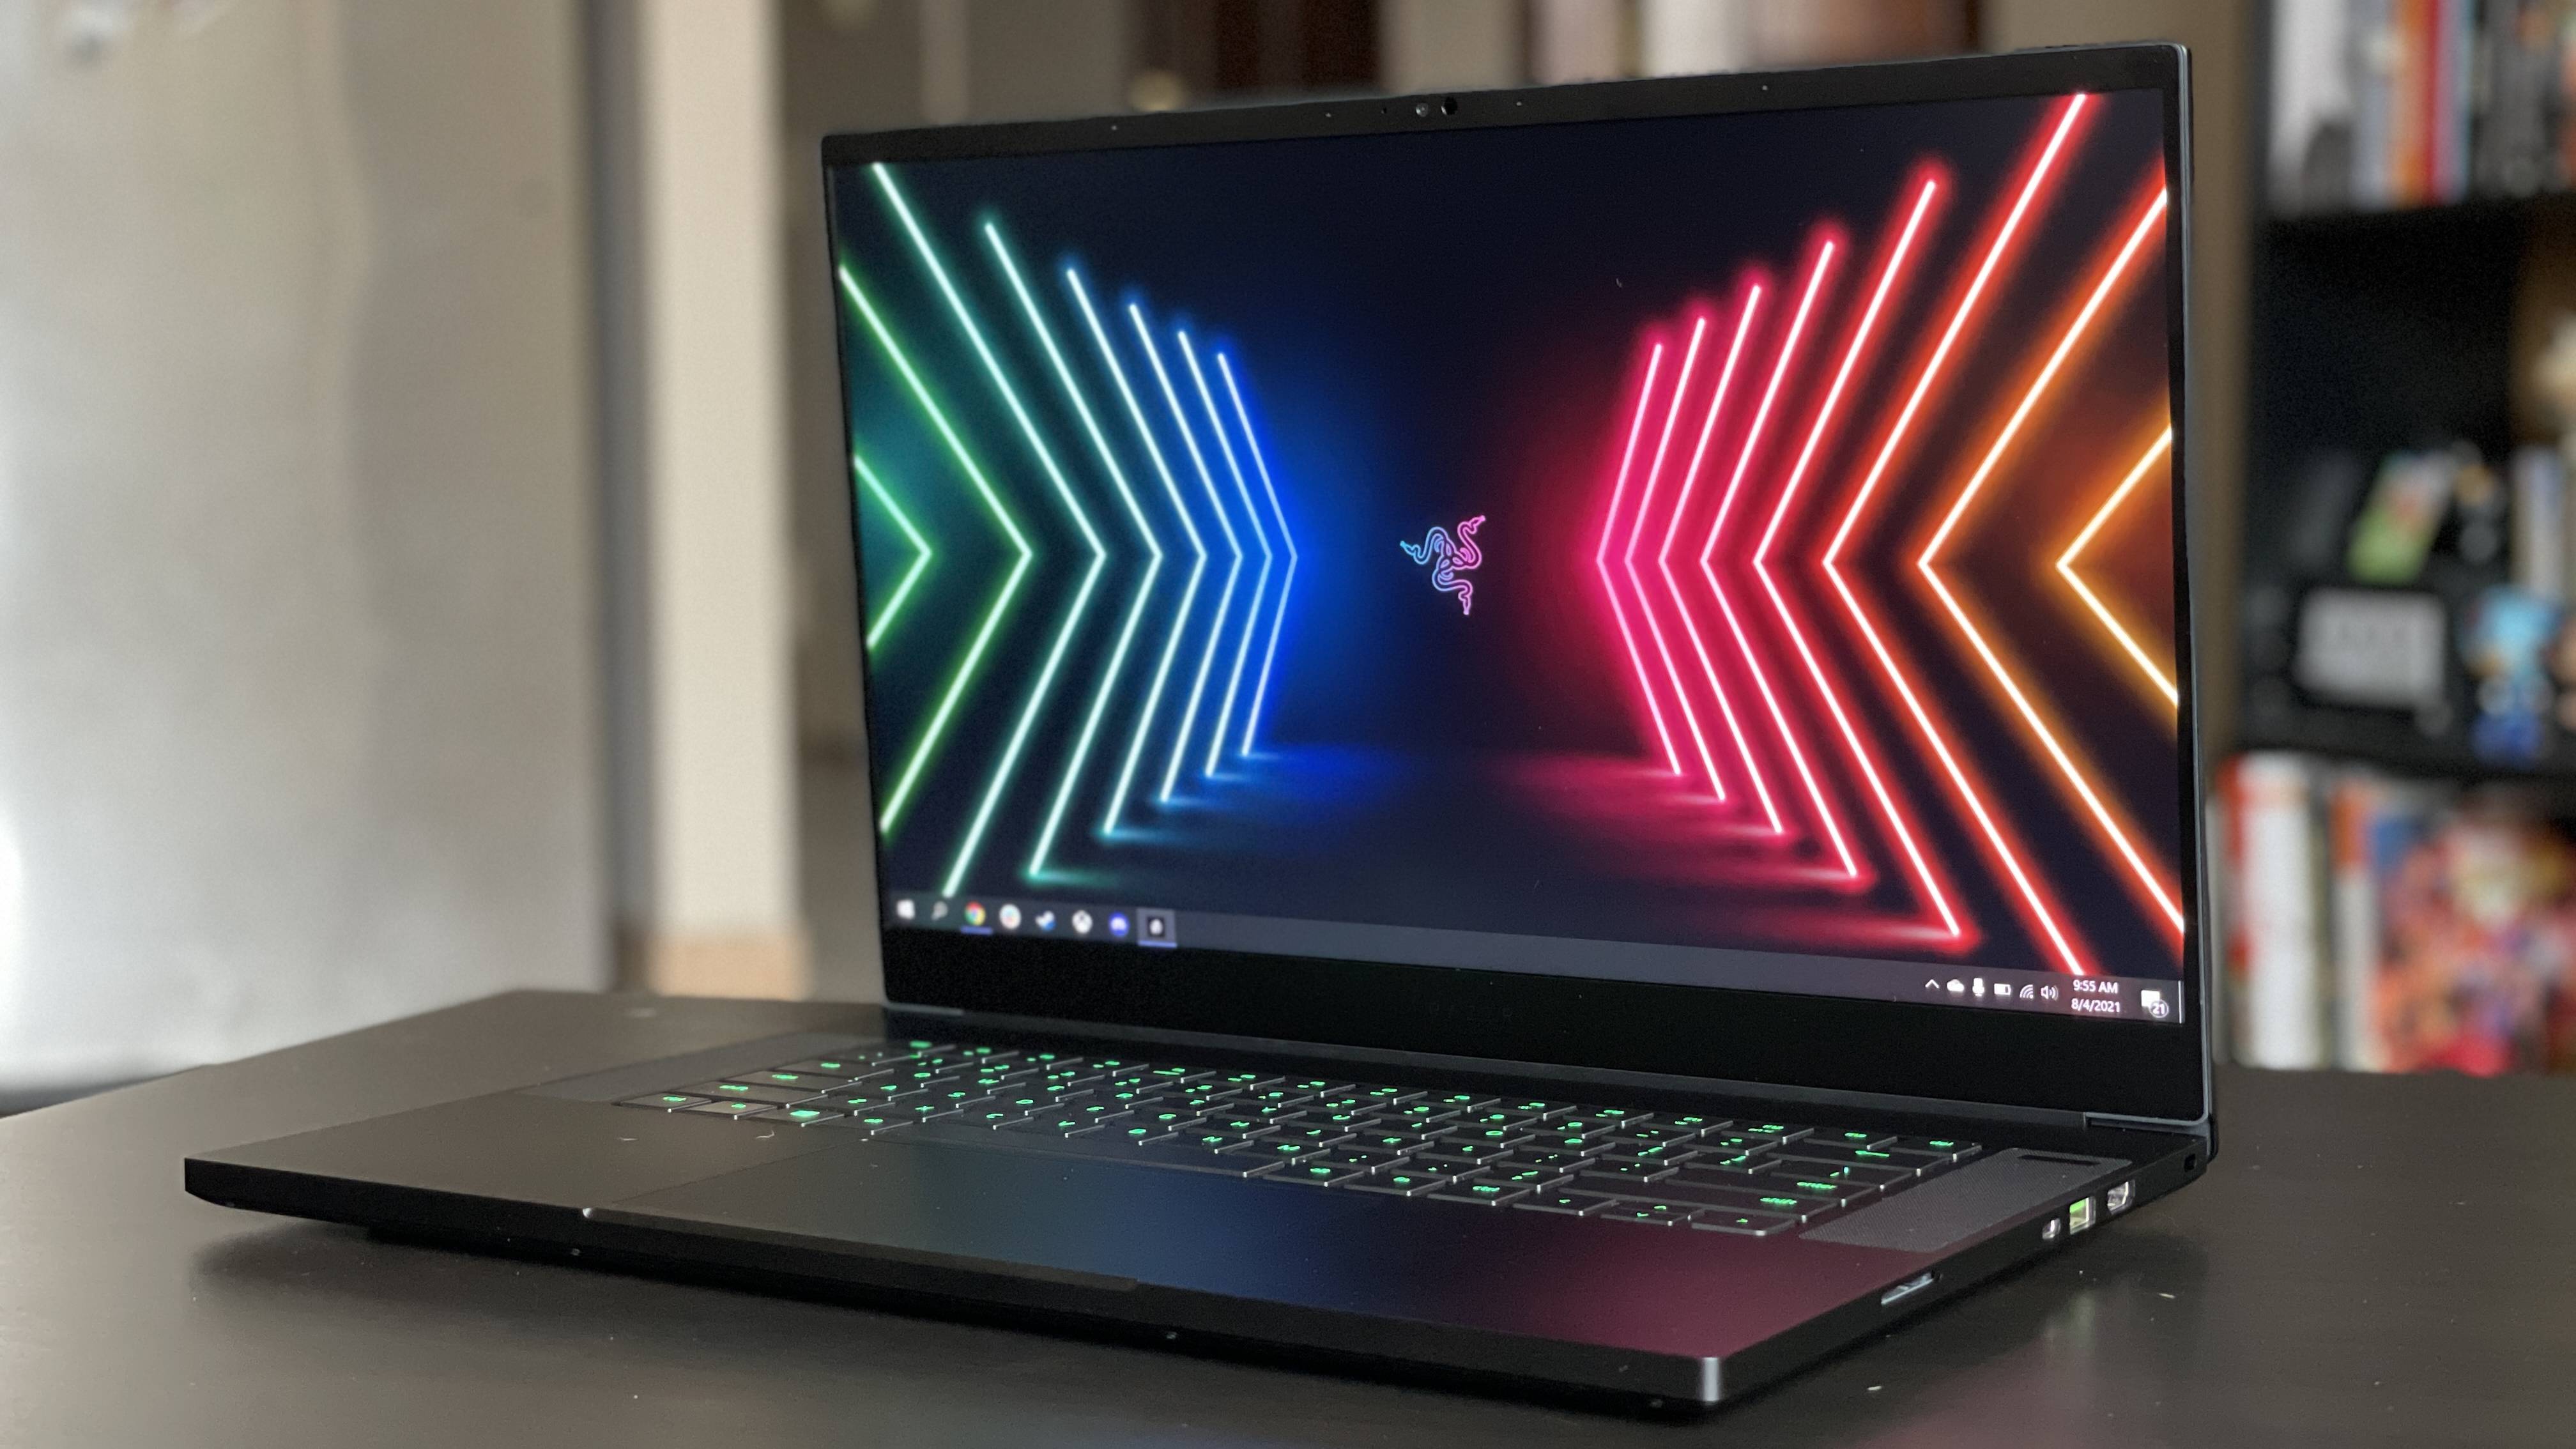 Futuristic Is The Razer Blade 15 Good For Gaming for Streamer